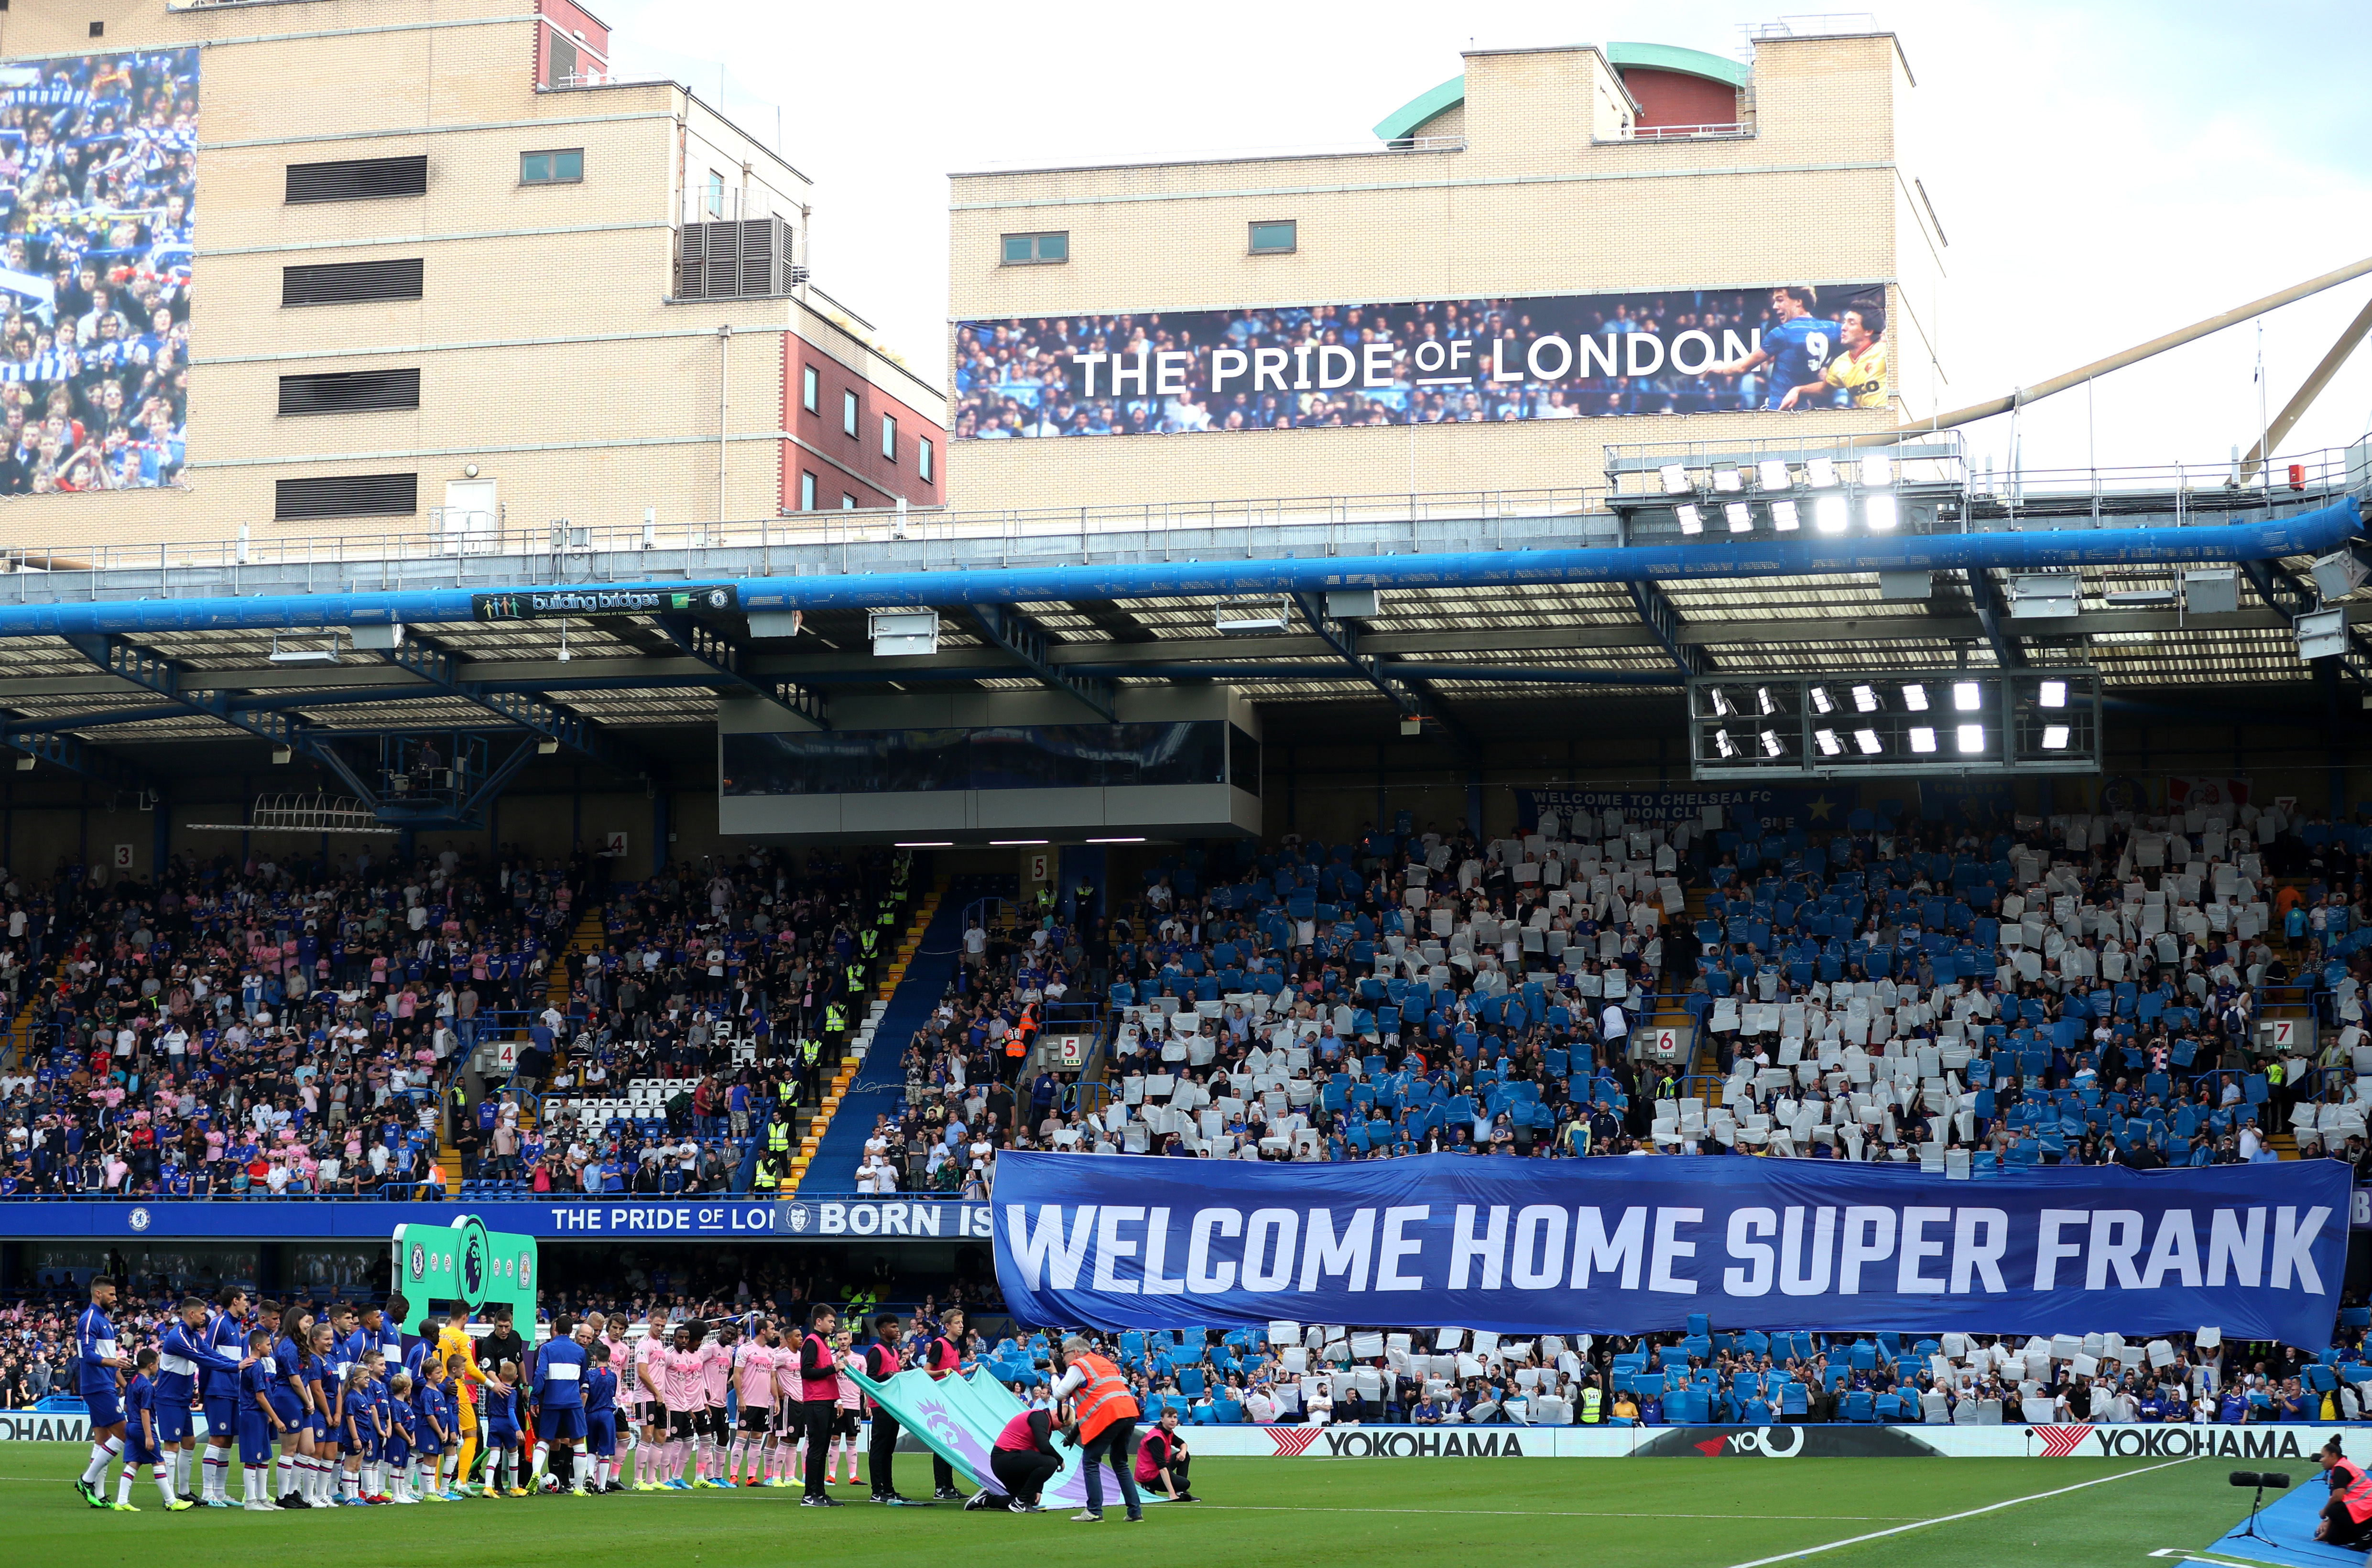 LONDON, ENGLAND - AUGUST 18: General view inside the stadium as both team's line up prior to the Premier League match between Chelsea FC and Leicester City at Stamford Bridge on August 18, 2019 in London, United Kingdom. (Photo by Catherine Ivill/Getty Images)